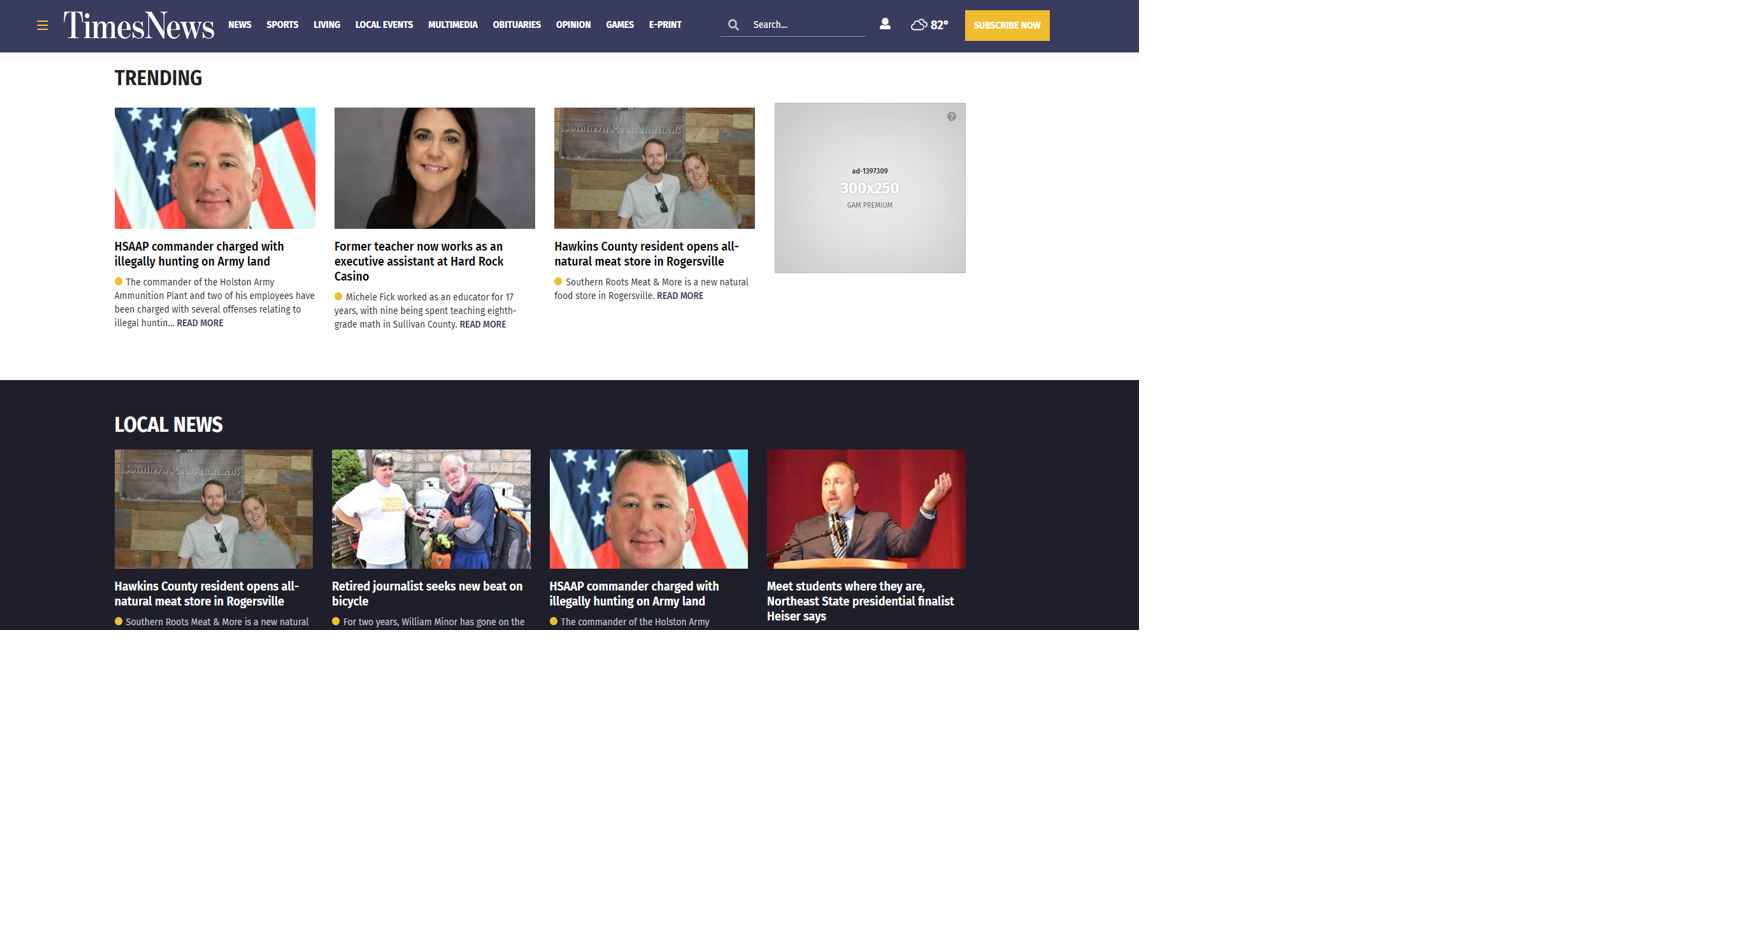 Times News to launch new website design | News